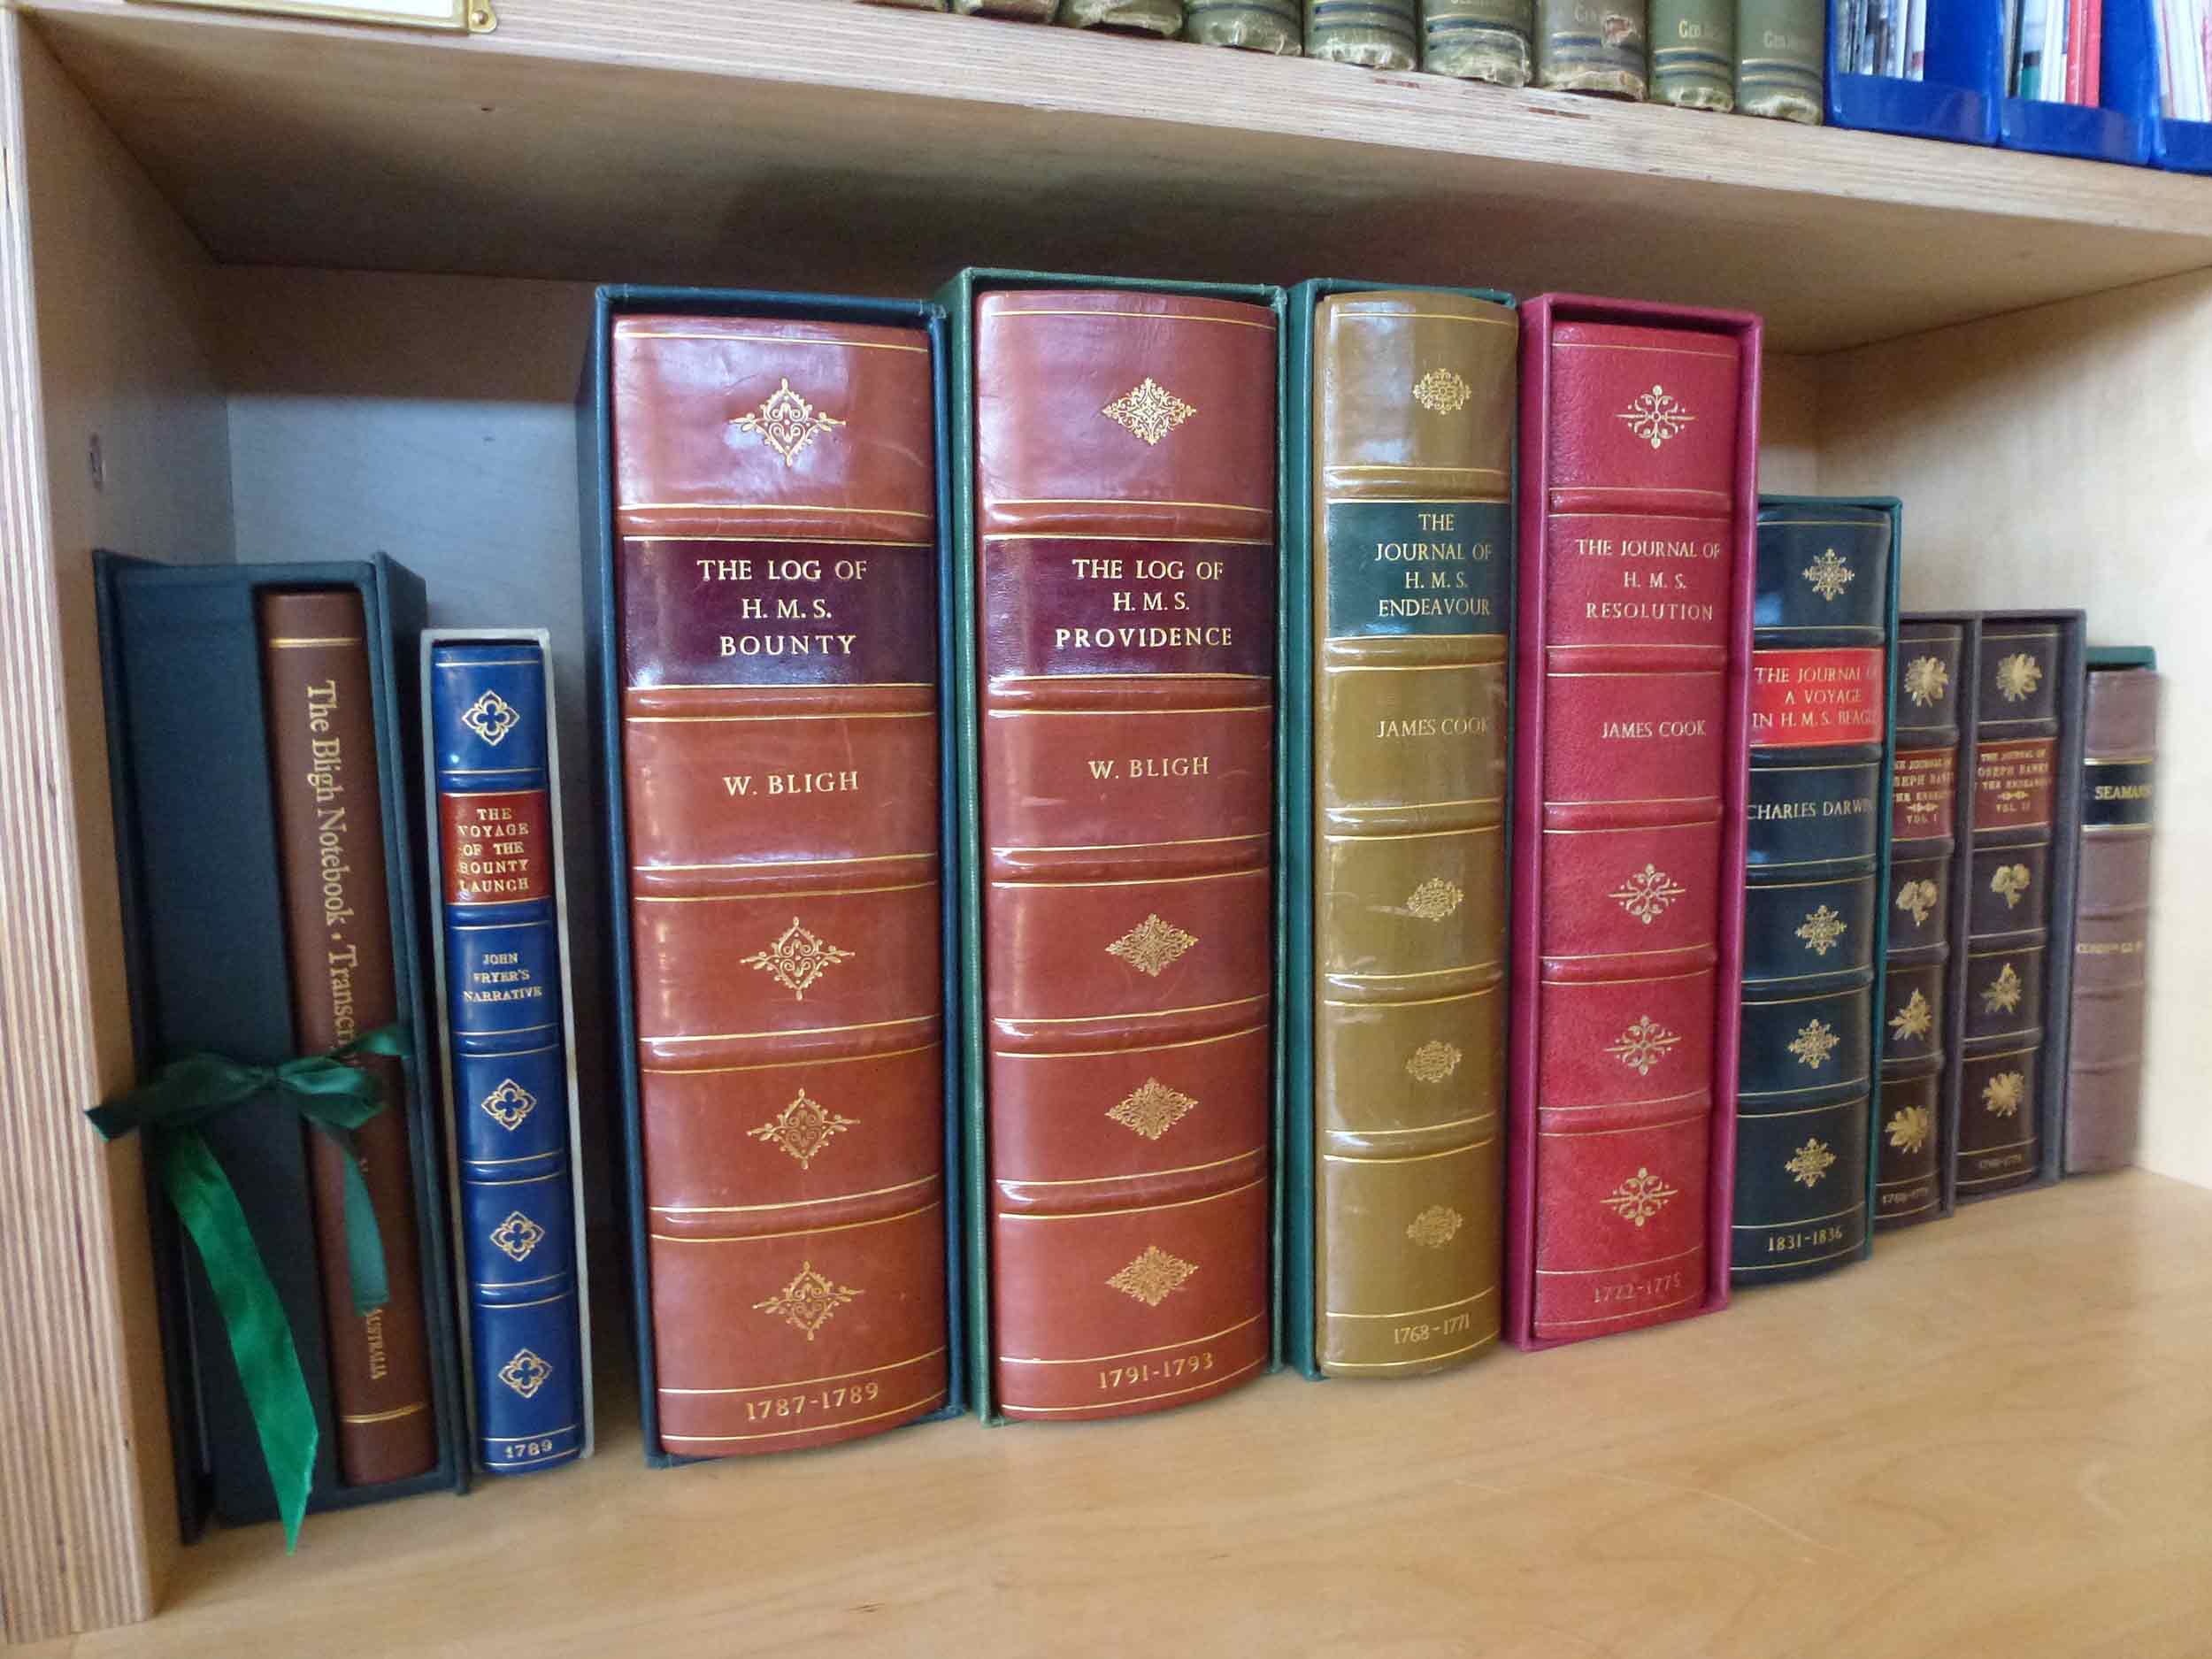 A series of books on display in the Bartlett Library, including the 'Log of H.M.S. Bounty' and 'the Journal of H.M.S. Endeavour'.